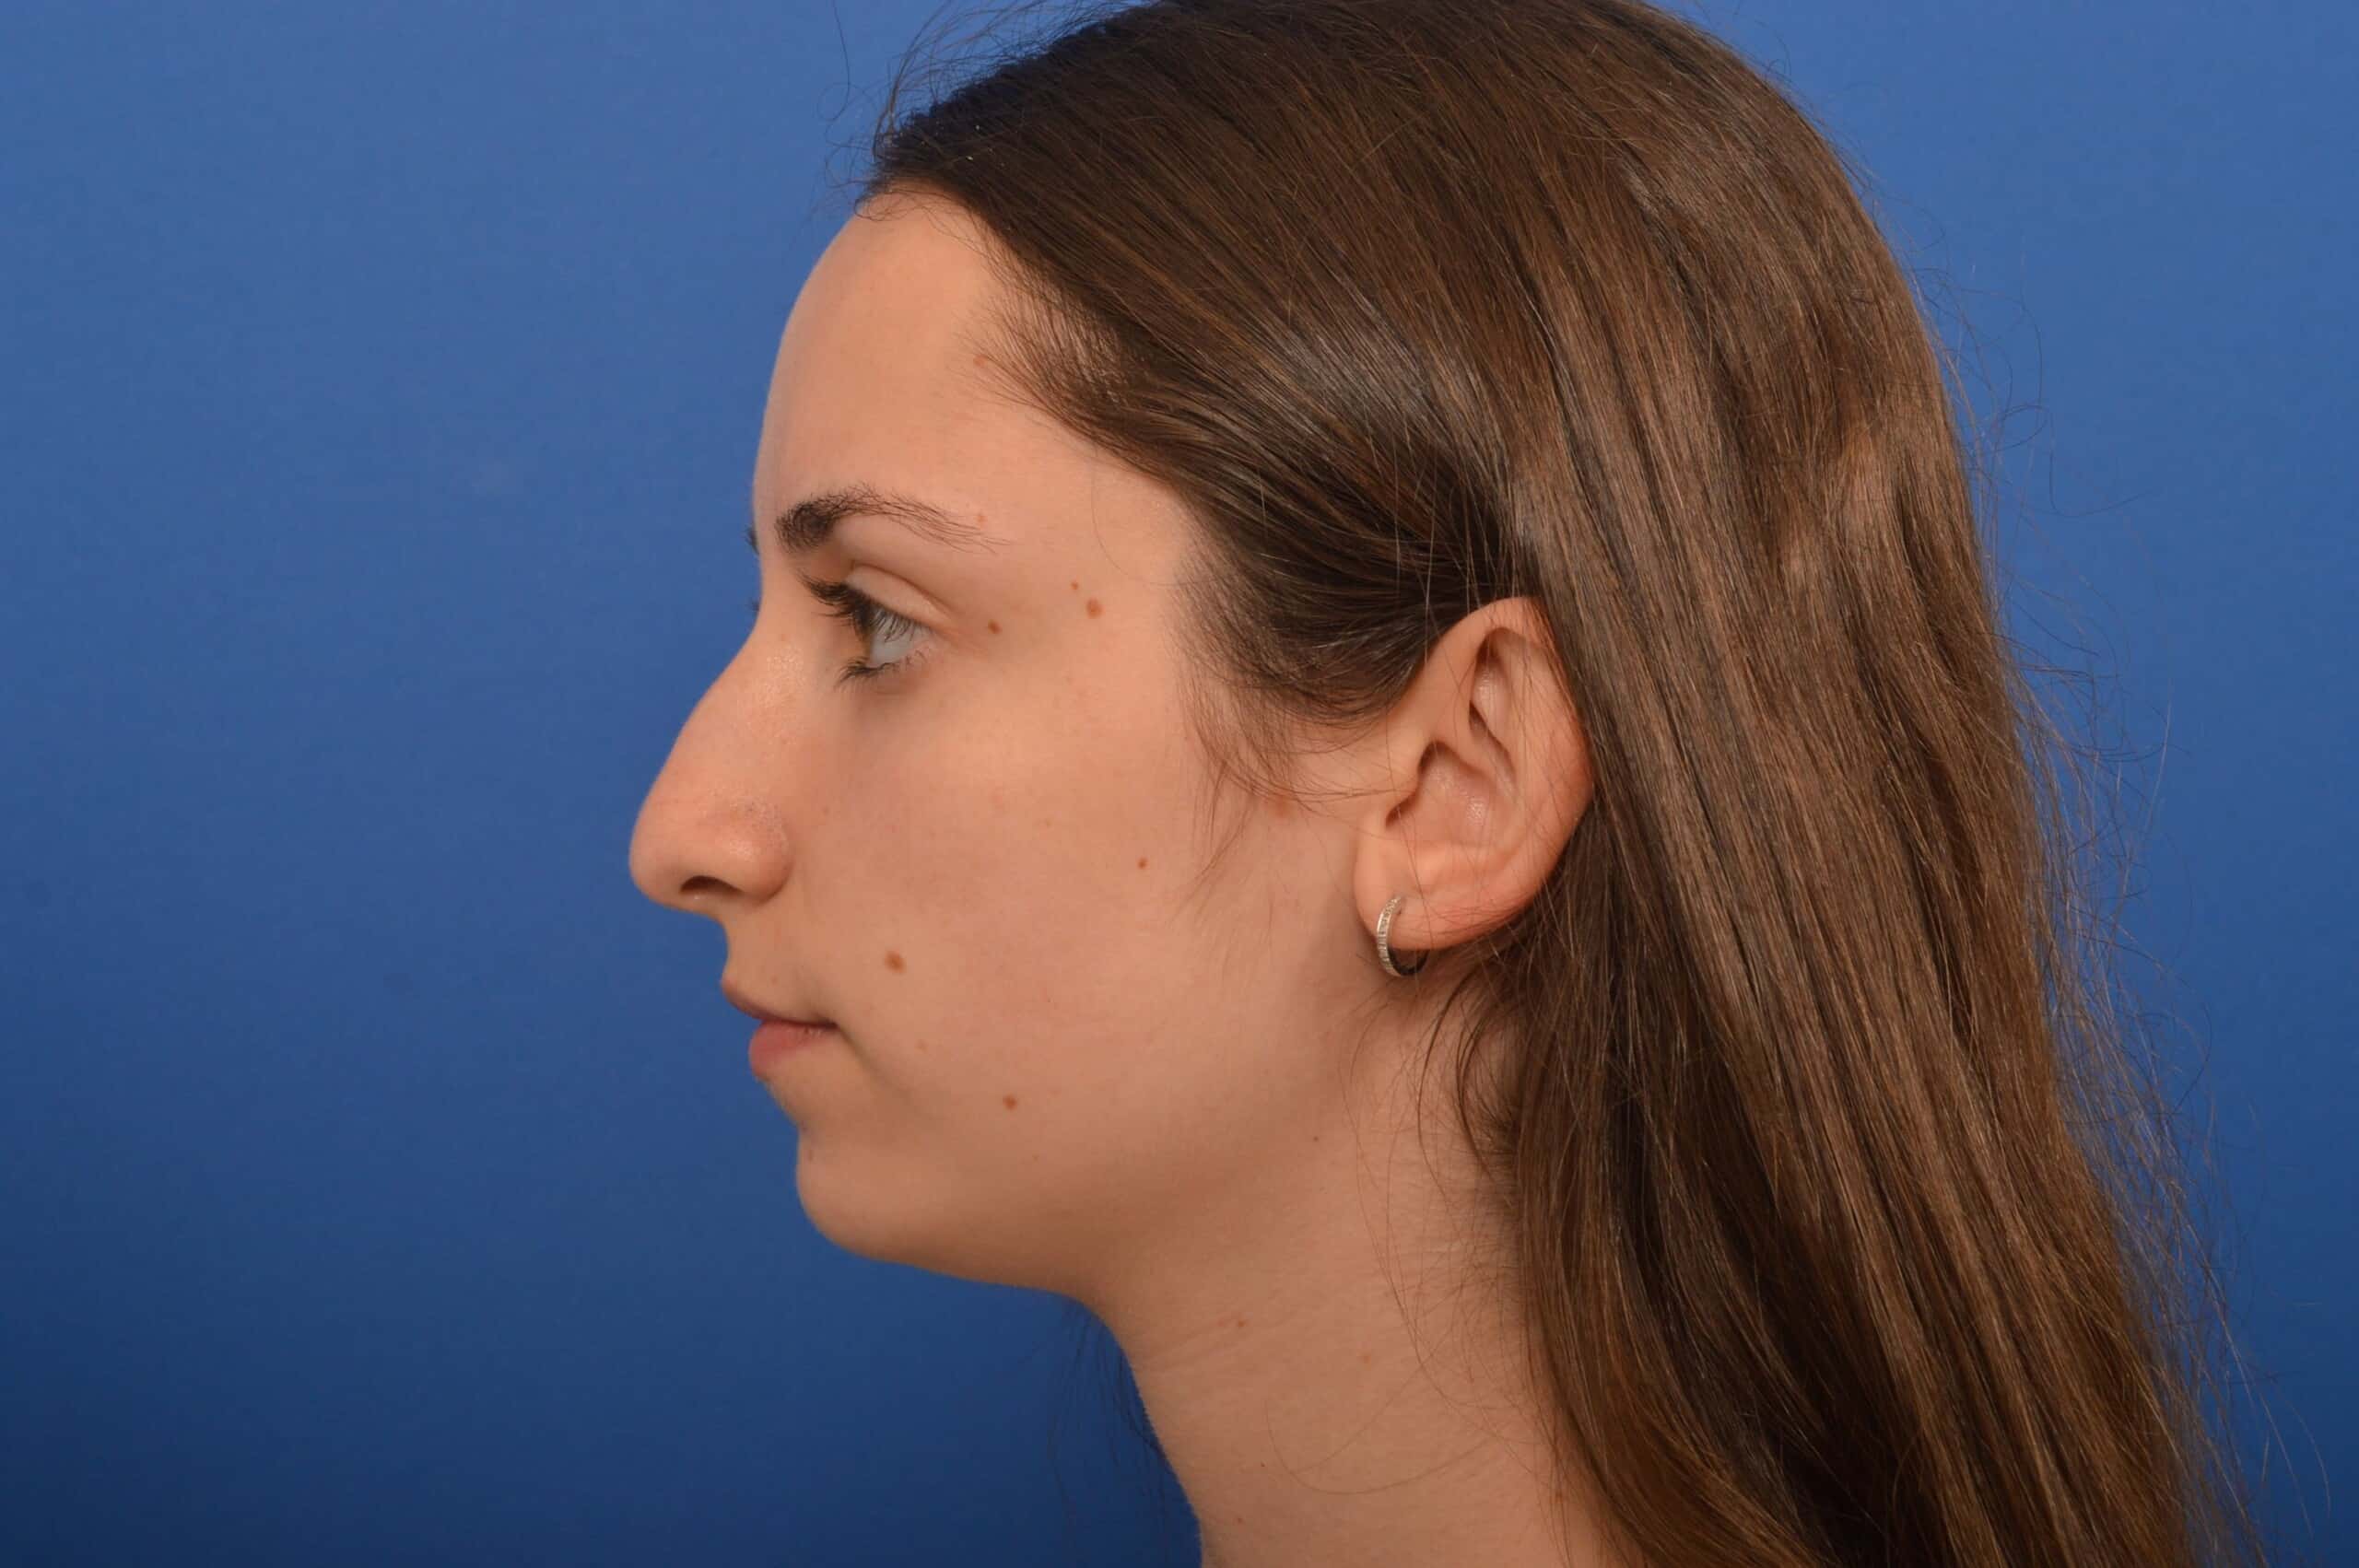 Nose Job Results Before and After